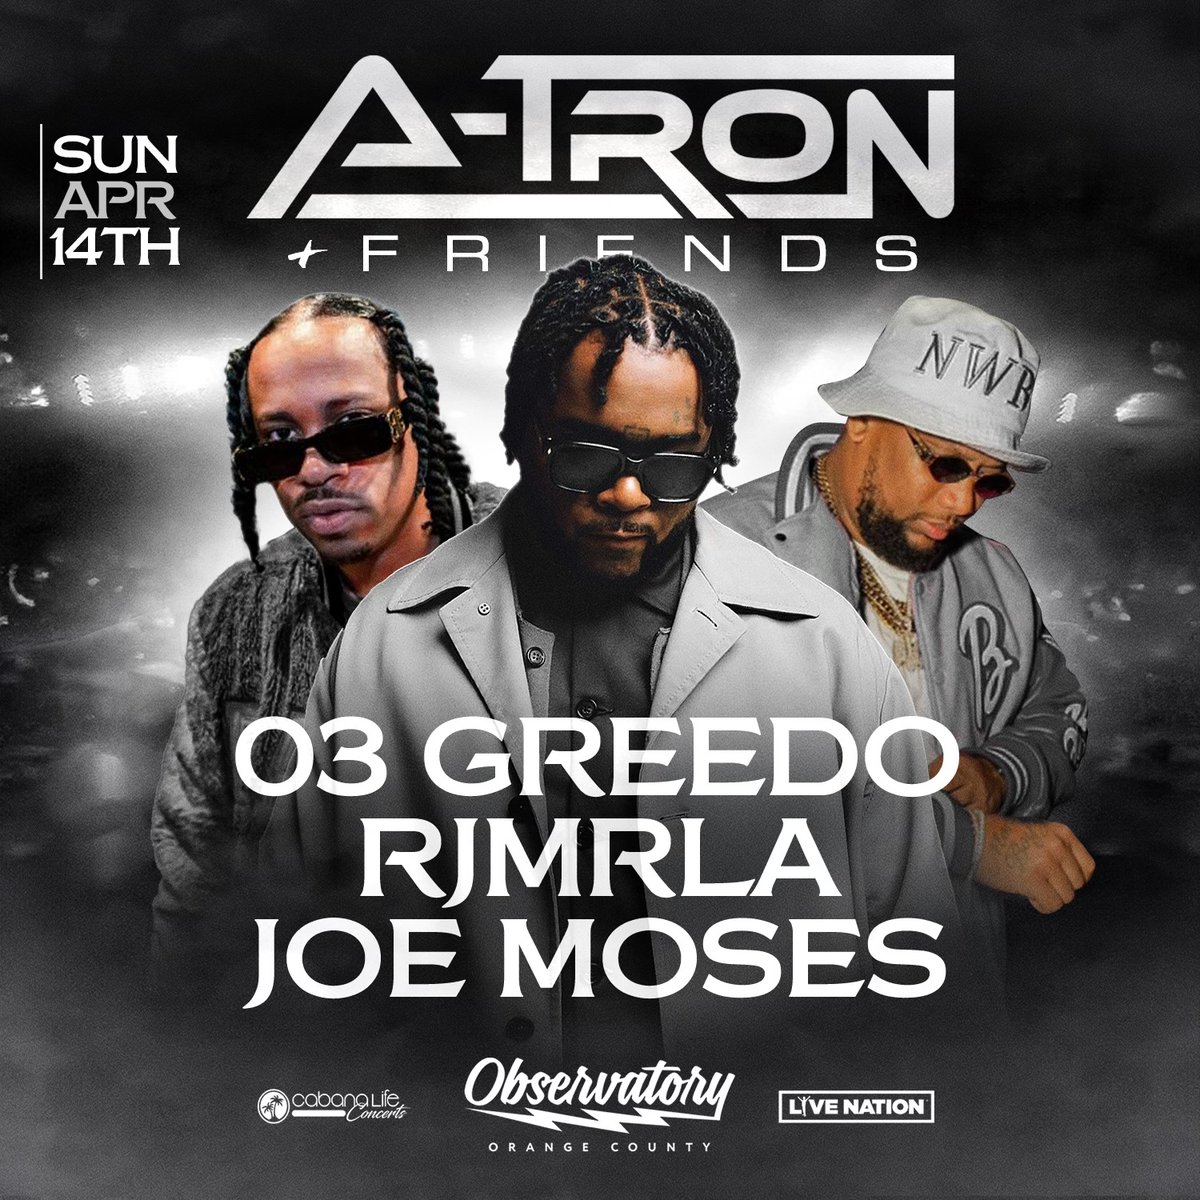 DJ A-tron & Friends are coming through to the Observatory ⚡ Get your tickets now and catch @03Greedo , @rjmrla, and @JOEMOSESAOB on April 14th. 🎟️ livemu.sc/3TS9oI0